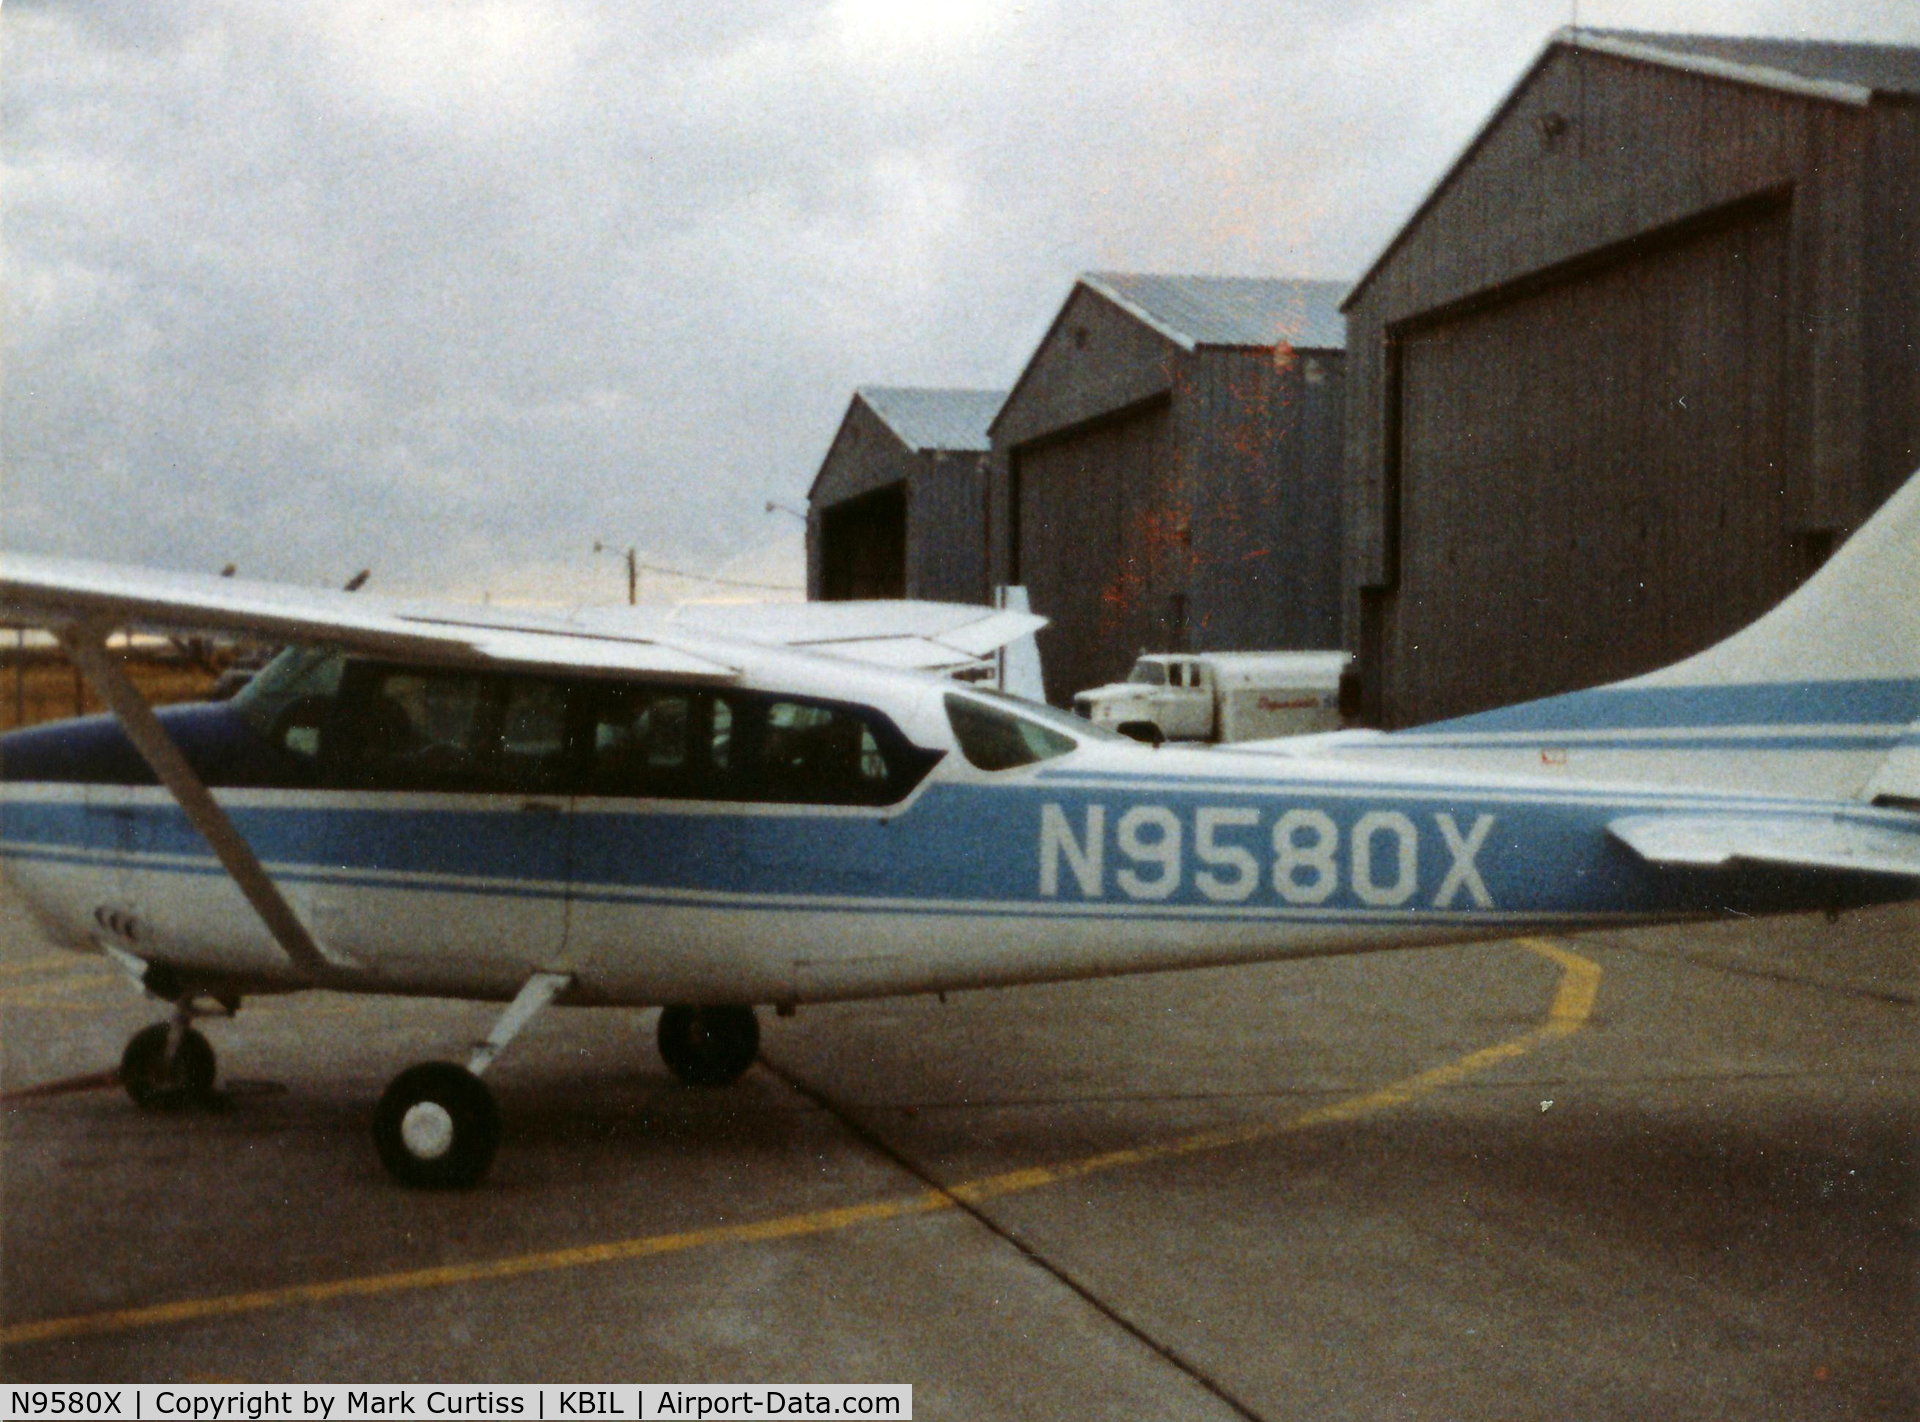 N9580X, 1962 Cessna 210B C/N 21057880, Plane my Dad flew for Associated Engineers in early 80's